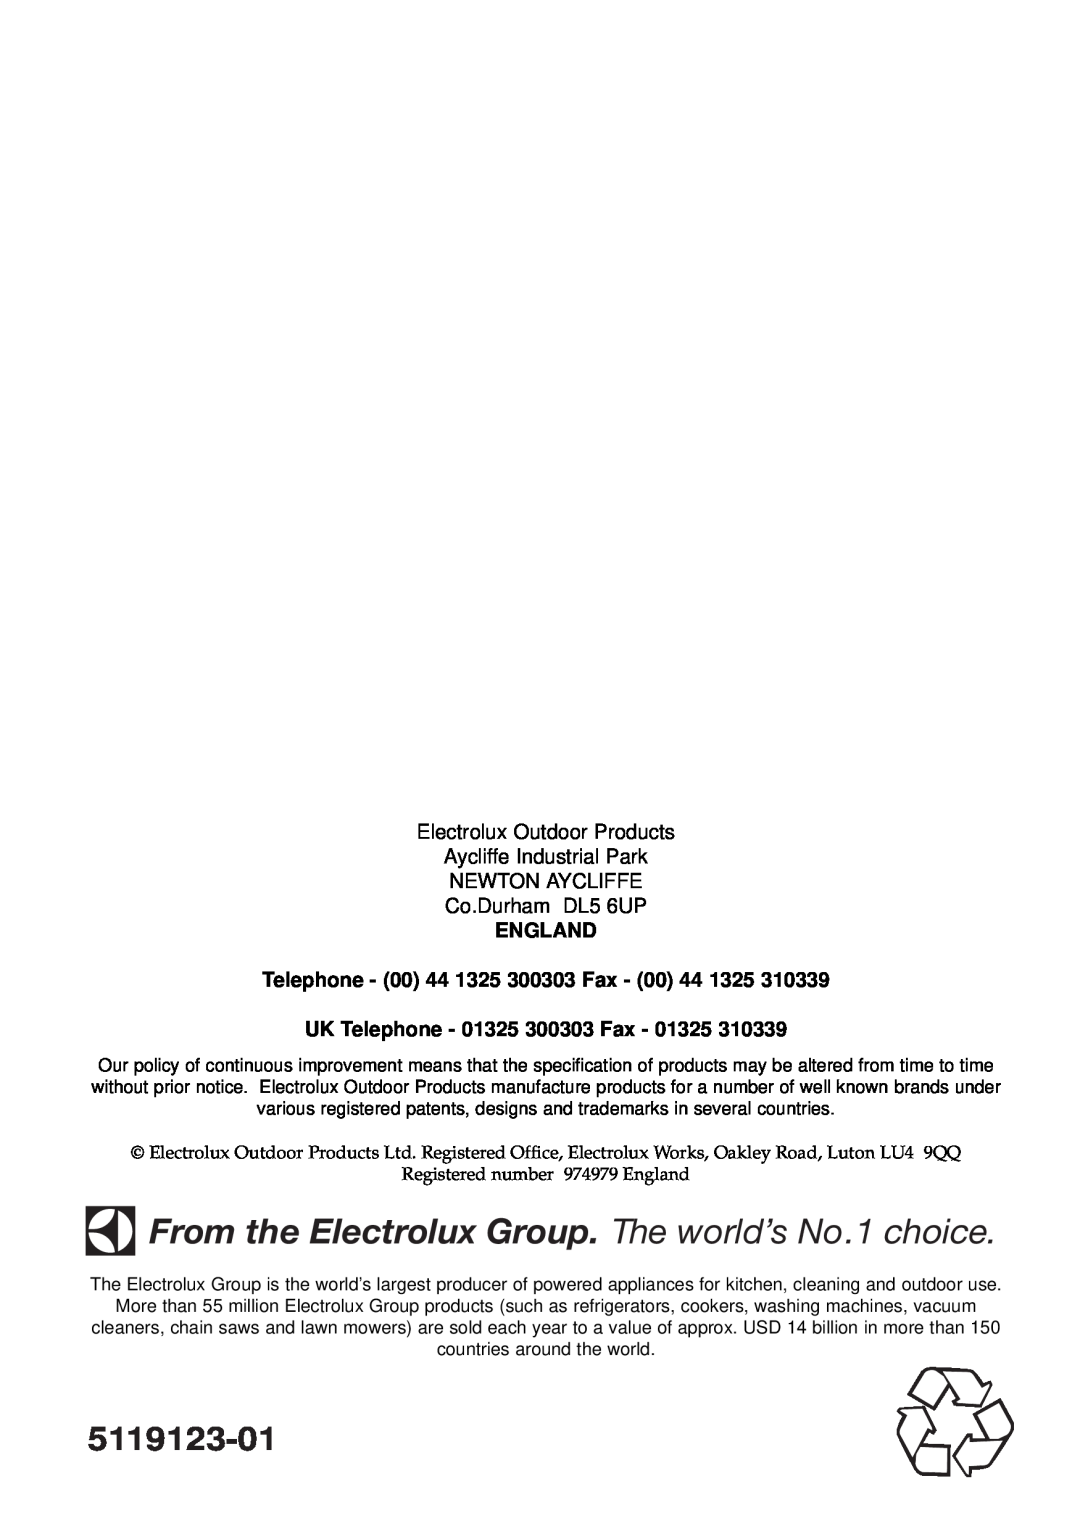 Flymo GT500 instruction manual From the Electrolux Group. The world’s No.1 choice, 5119123-01, Co.Durham DL5 6UP 